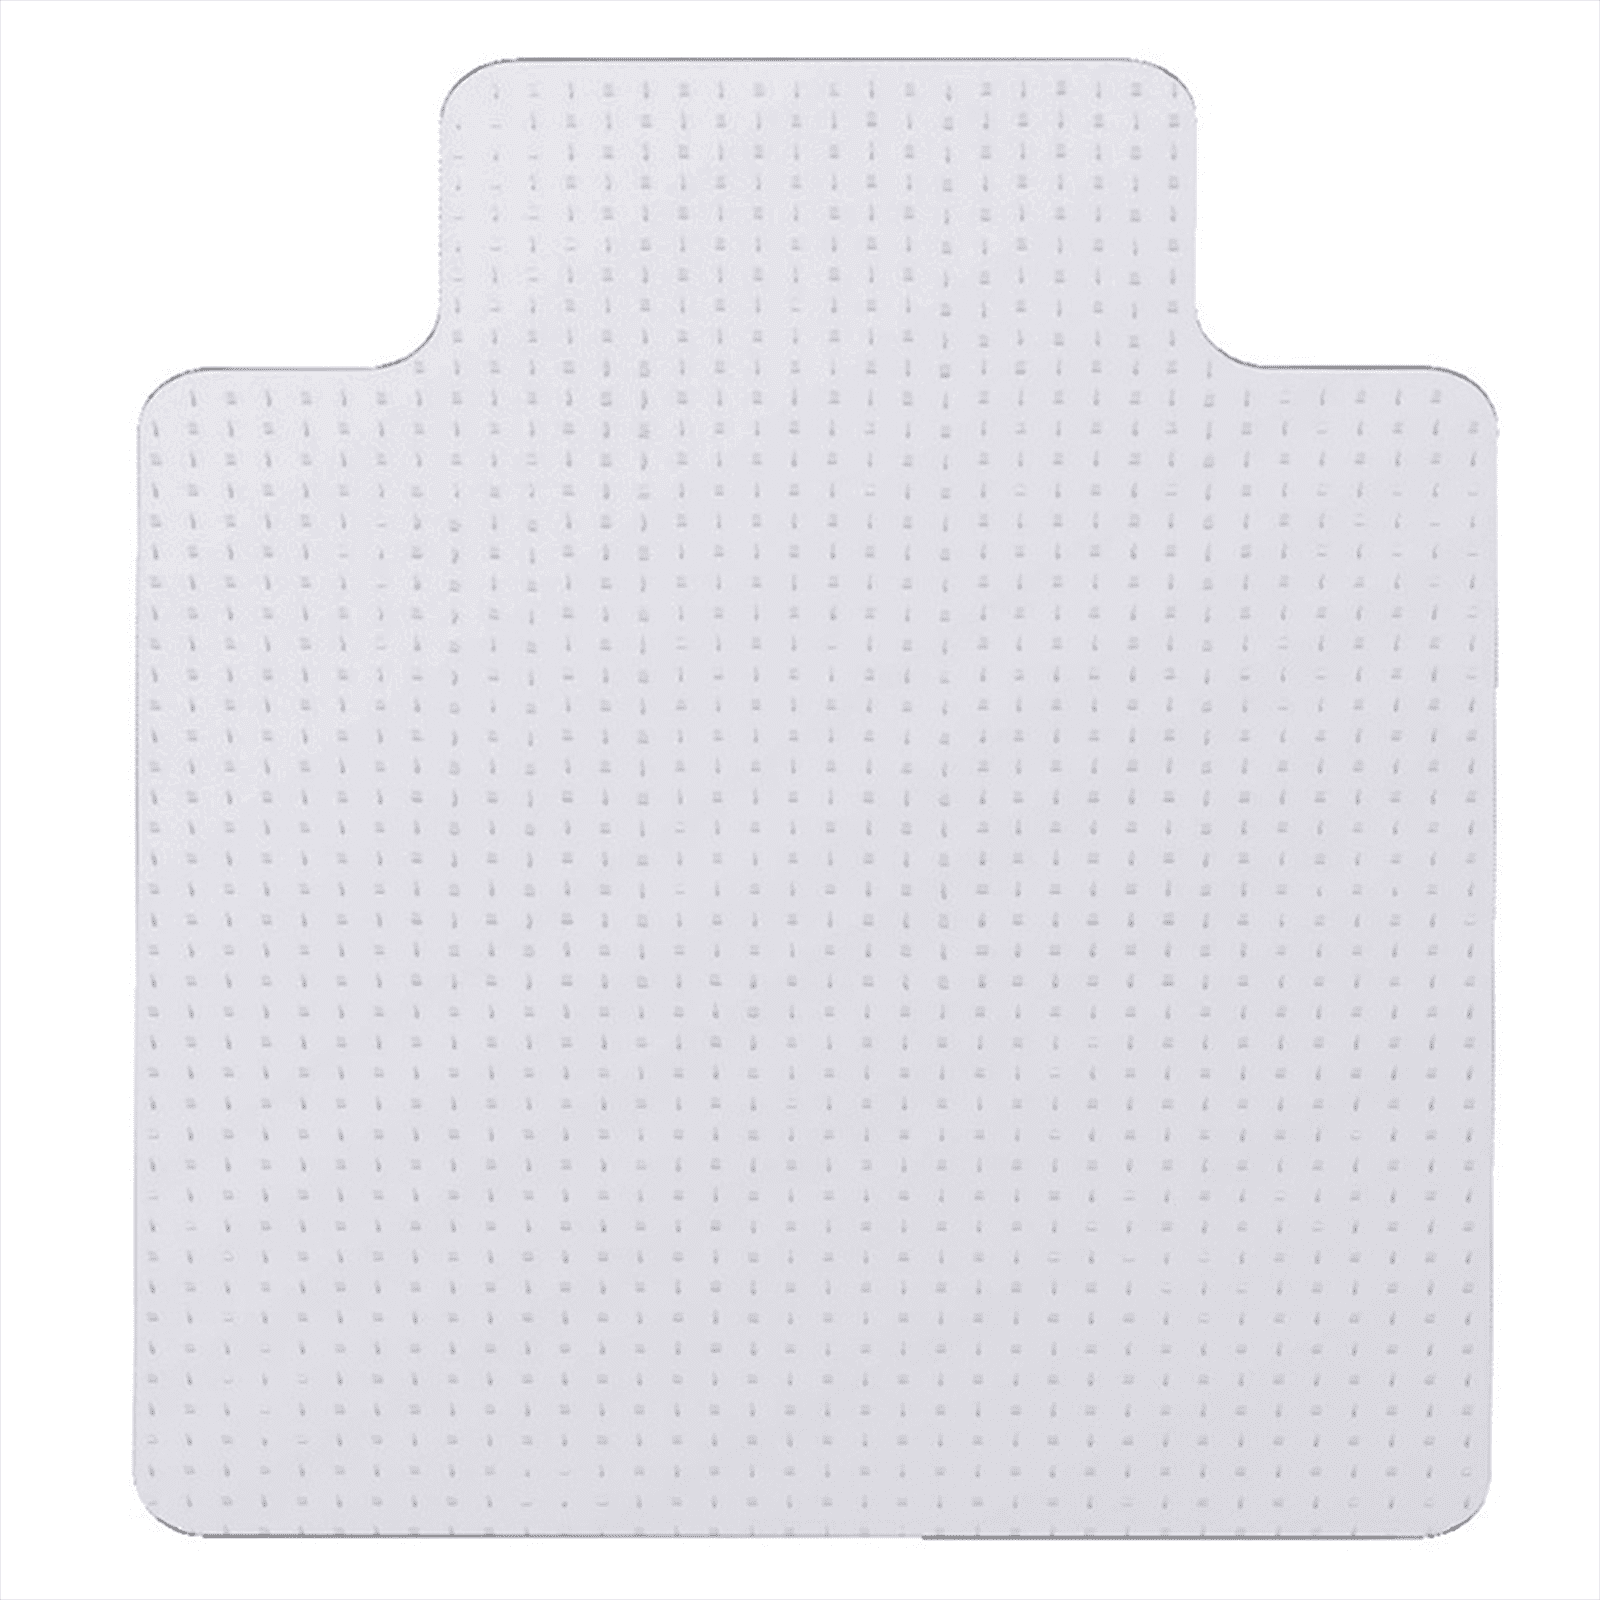 Mammoth Office Products Polycarbonate Chair Mat for Hard Floor Rectangular, 30W x 48L (C3048HF)